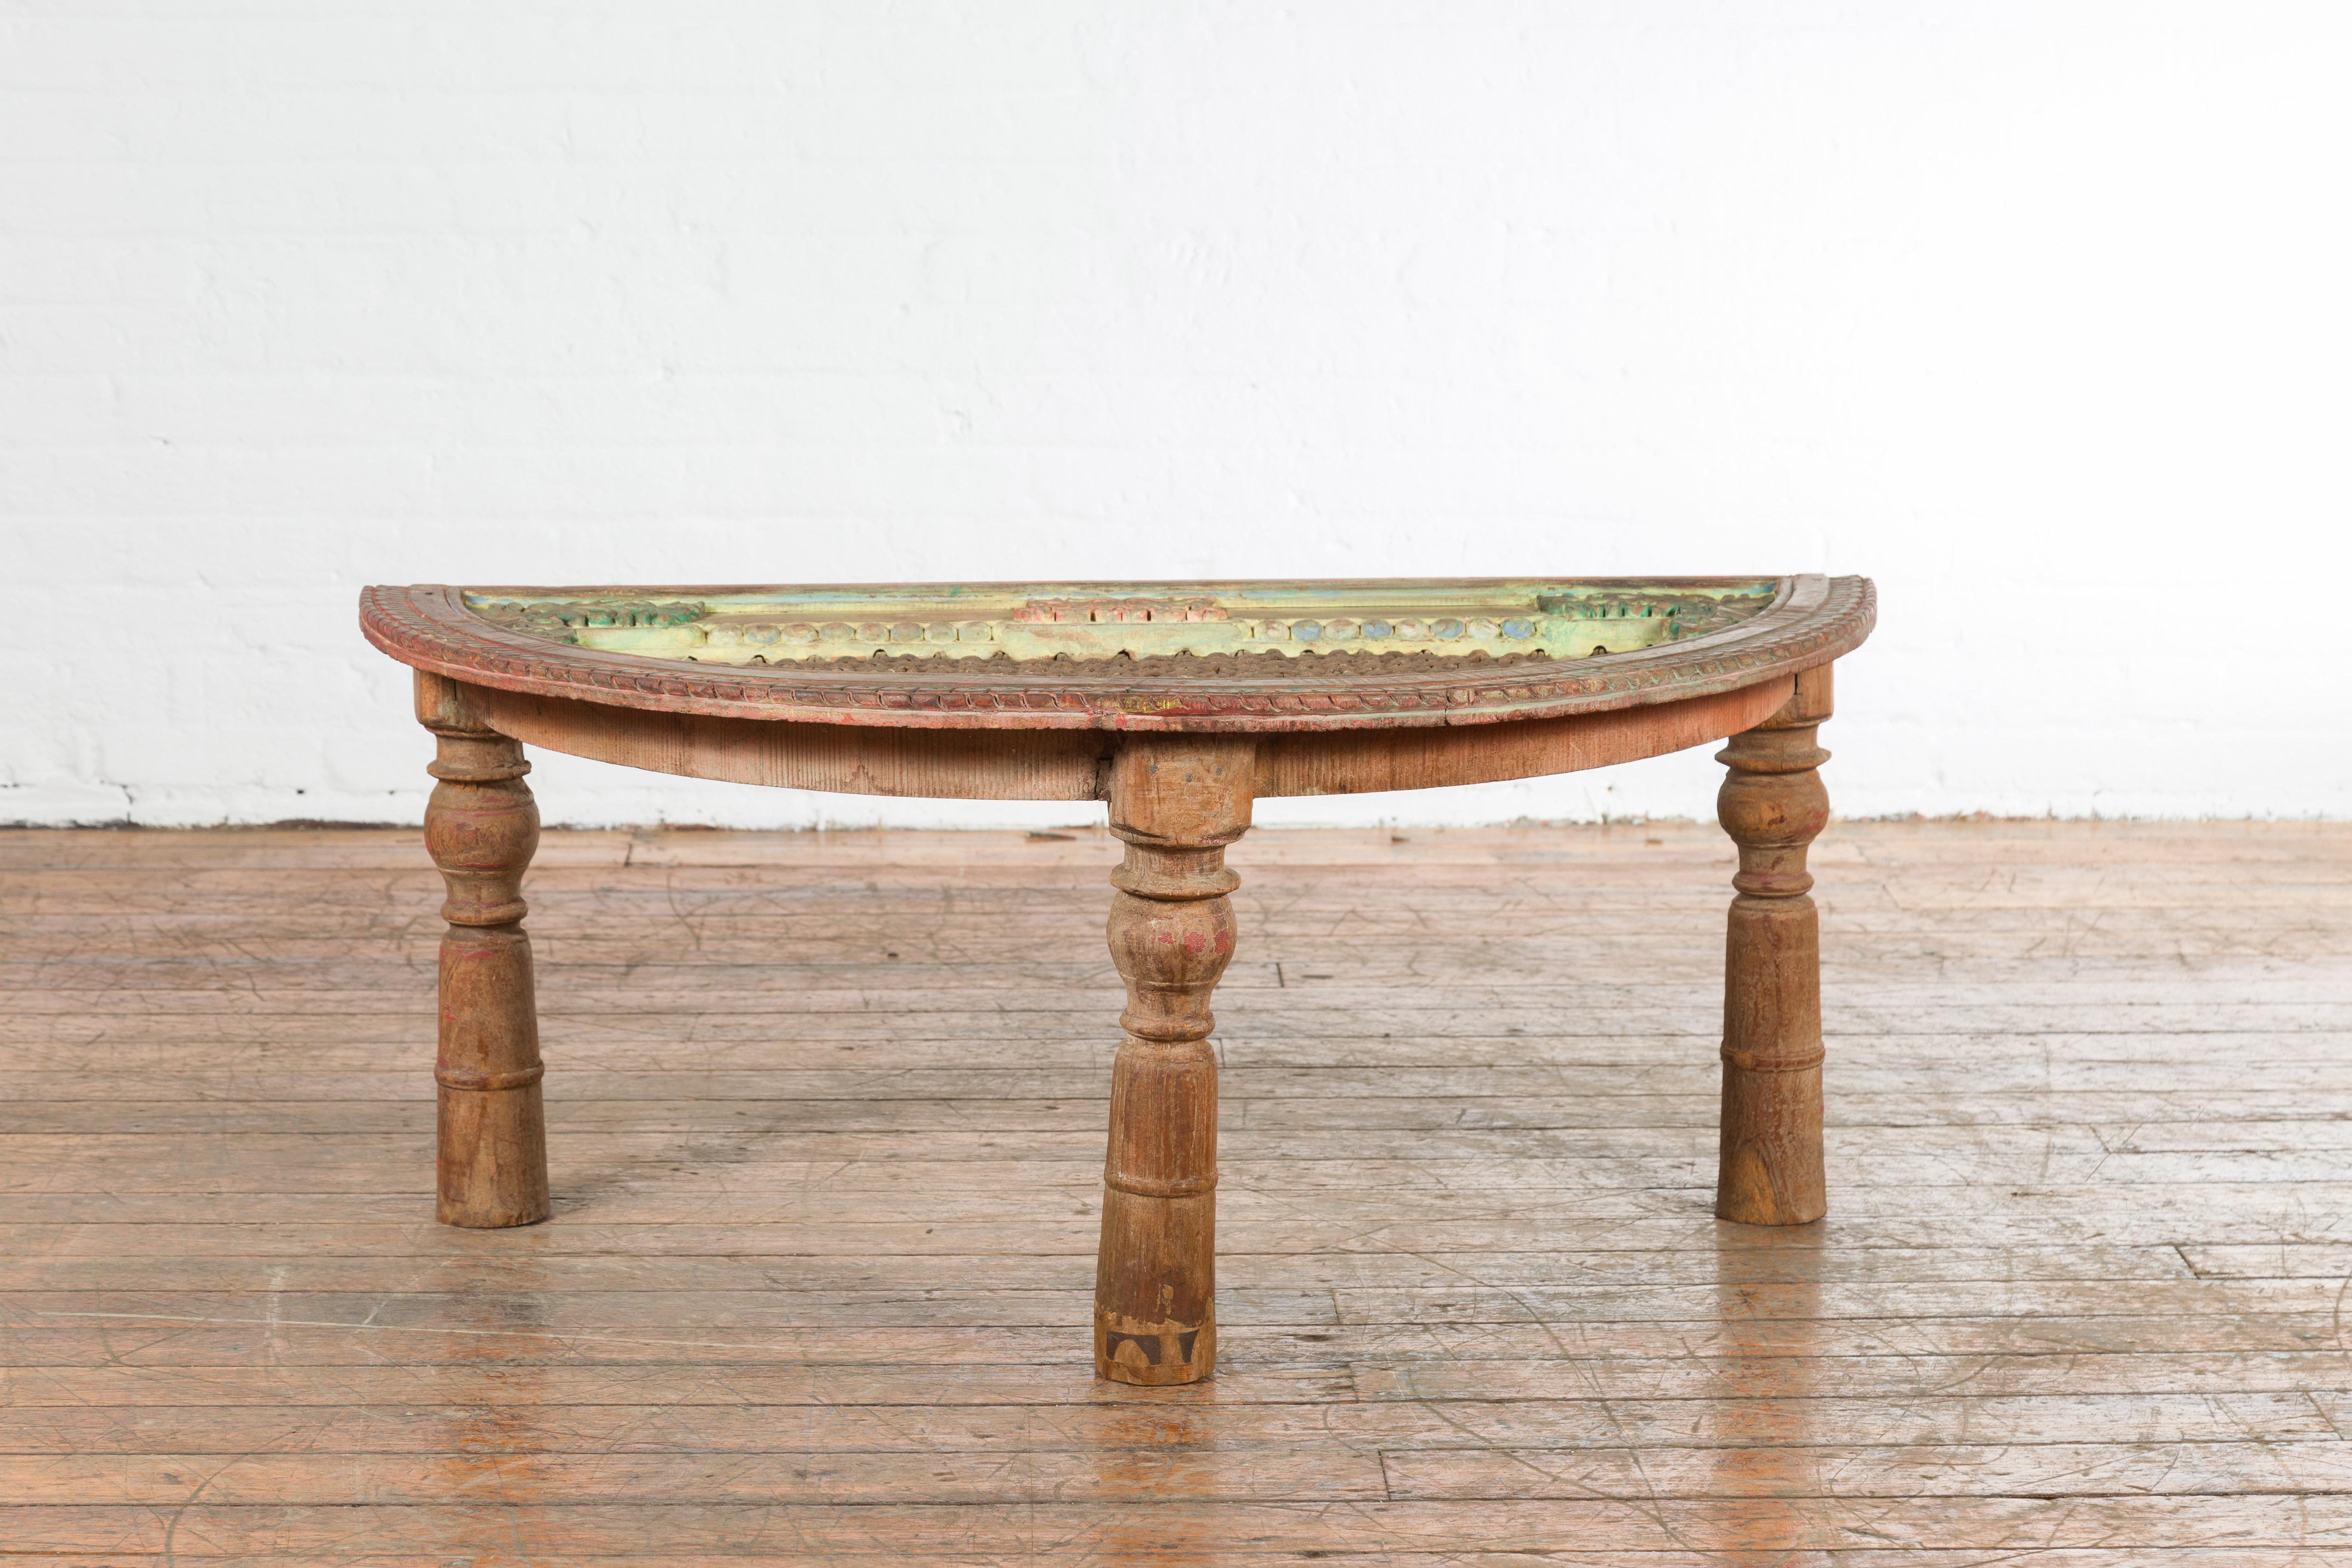 An Indian antique sheesham wood low demilune table from the 19th century, with window grate iron top, pastel accents and turned baluster legs. Created in India during the 19th century, this sheesham wood demi-lune features a semi-circular top